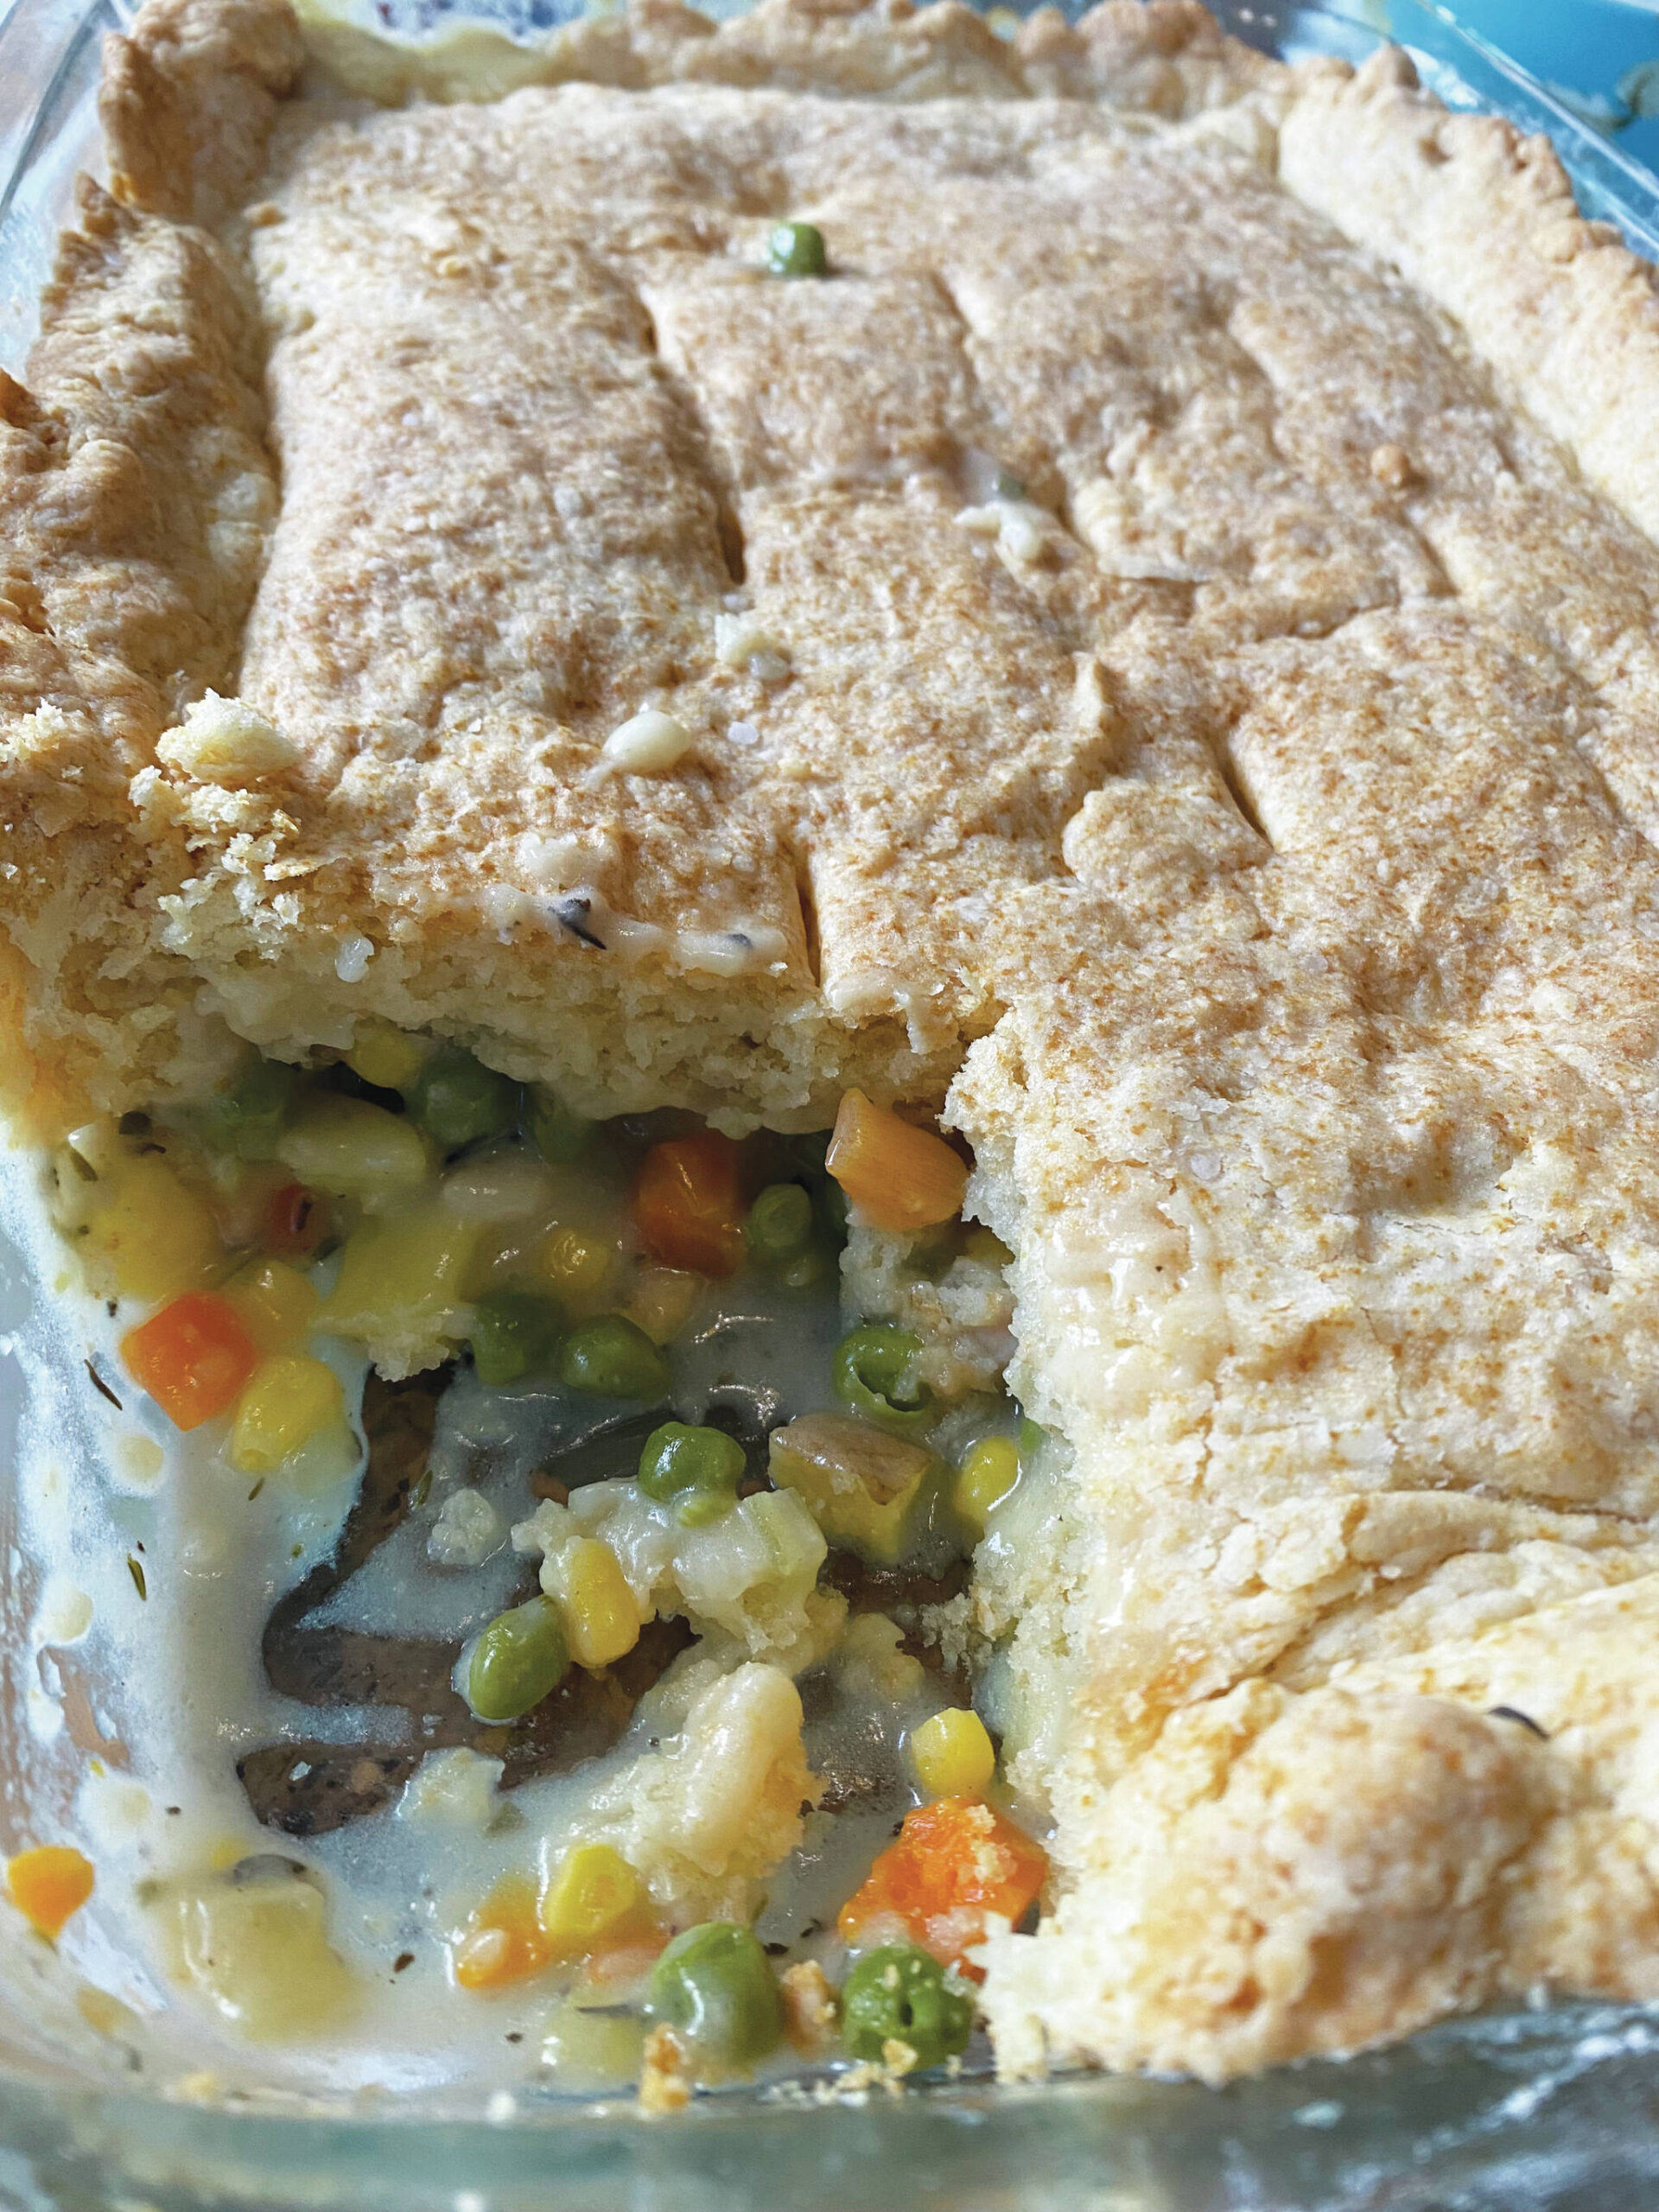 Photo by Tressa Dale/Peninsula Clarion
Shredded chicken and vegetables are topped with a butter crust in this classic chicken pot pie.